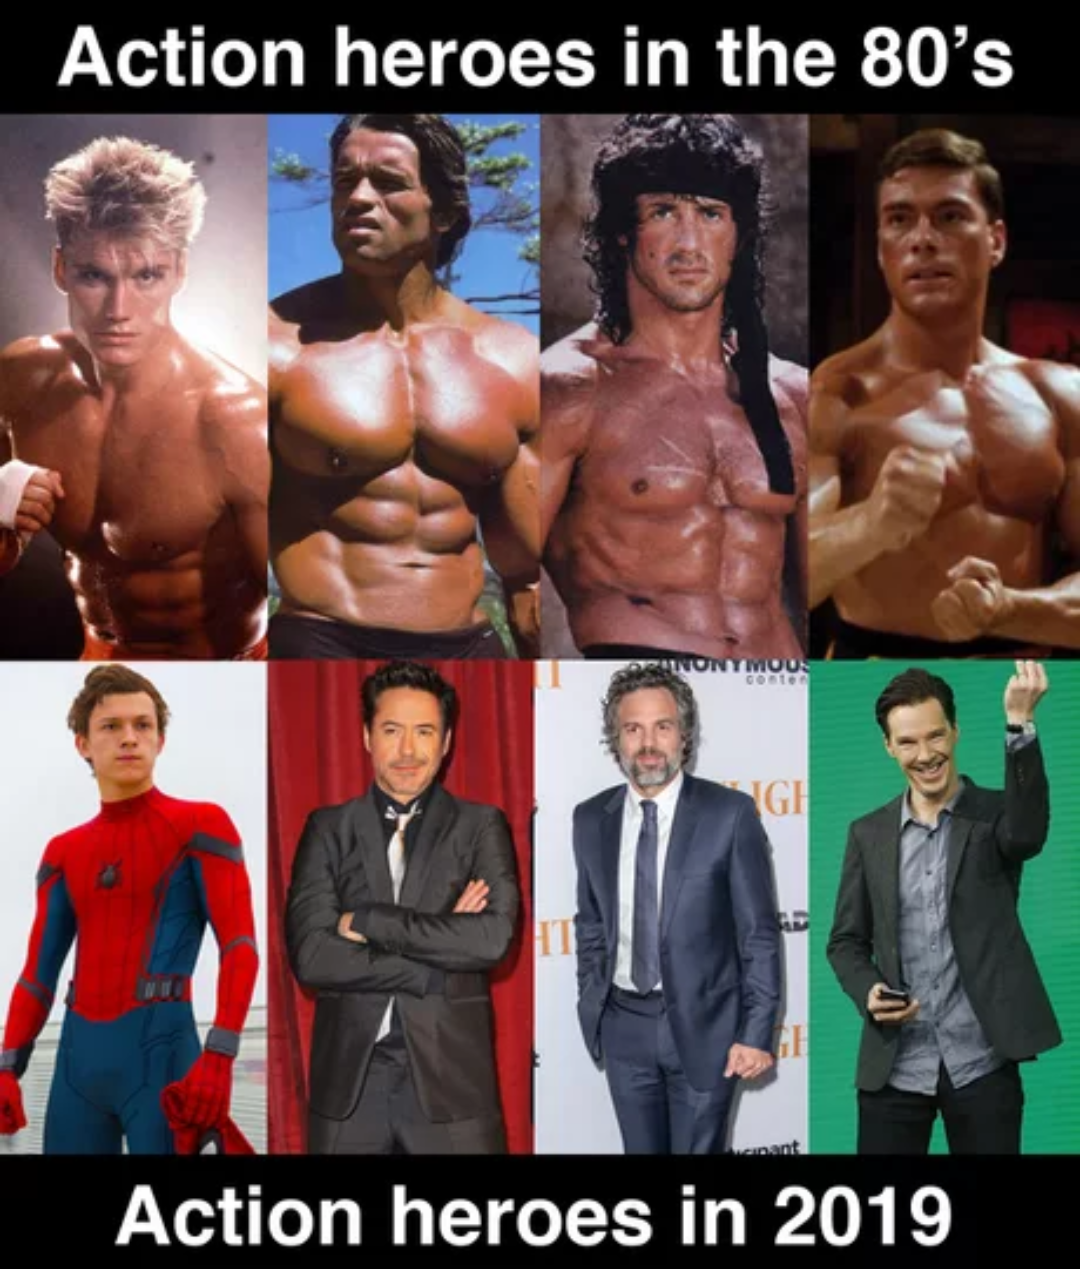 Action heroes then and now - Celebrities, Боевики